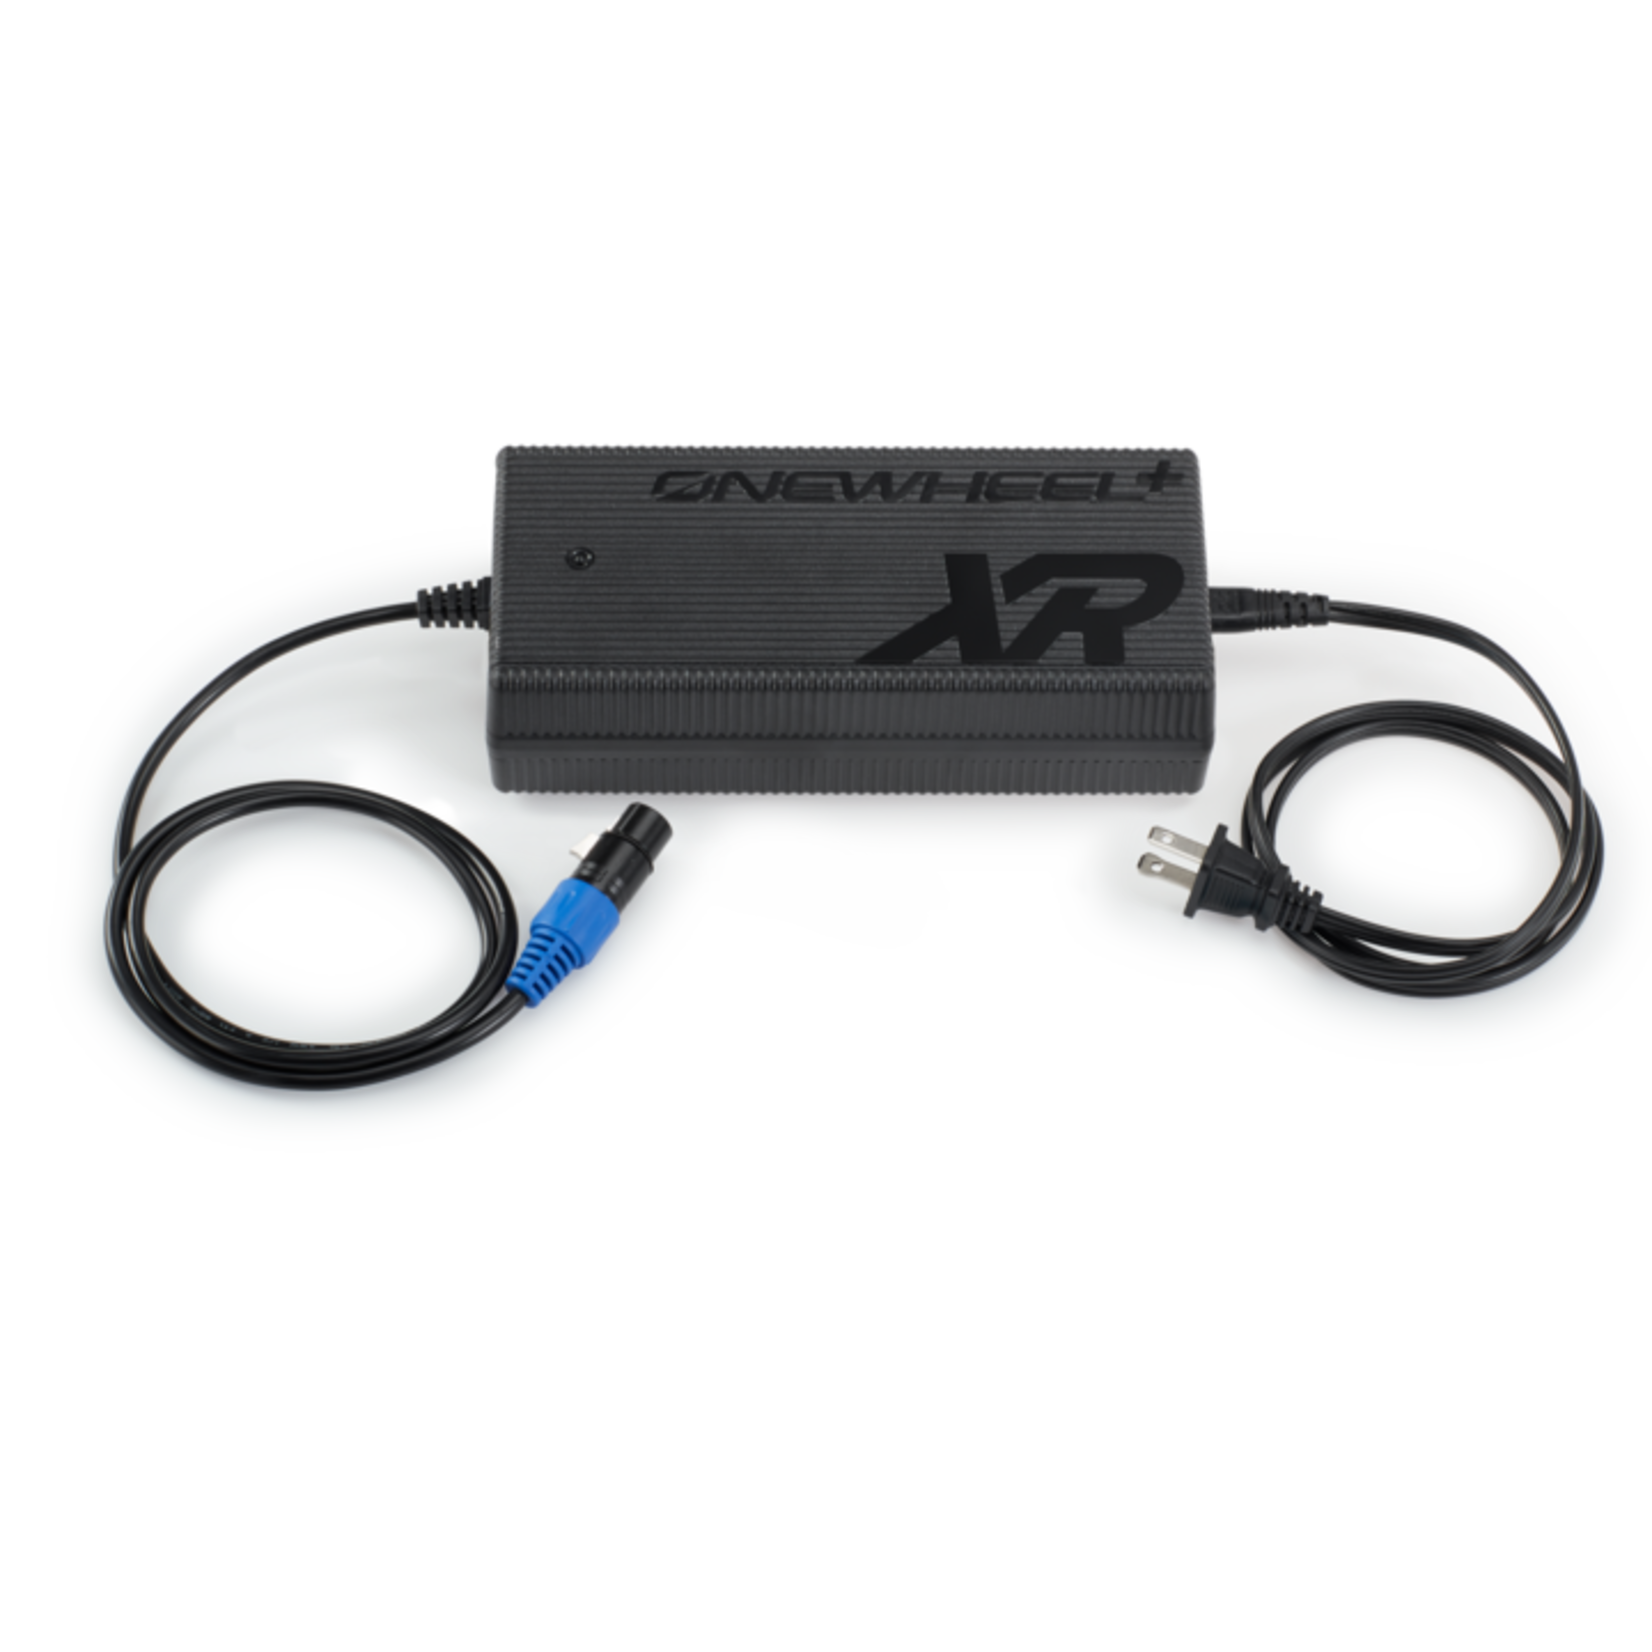 ONEWHEEL ONEWHEEL XR Home Hyper Charger